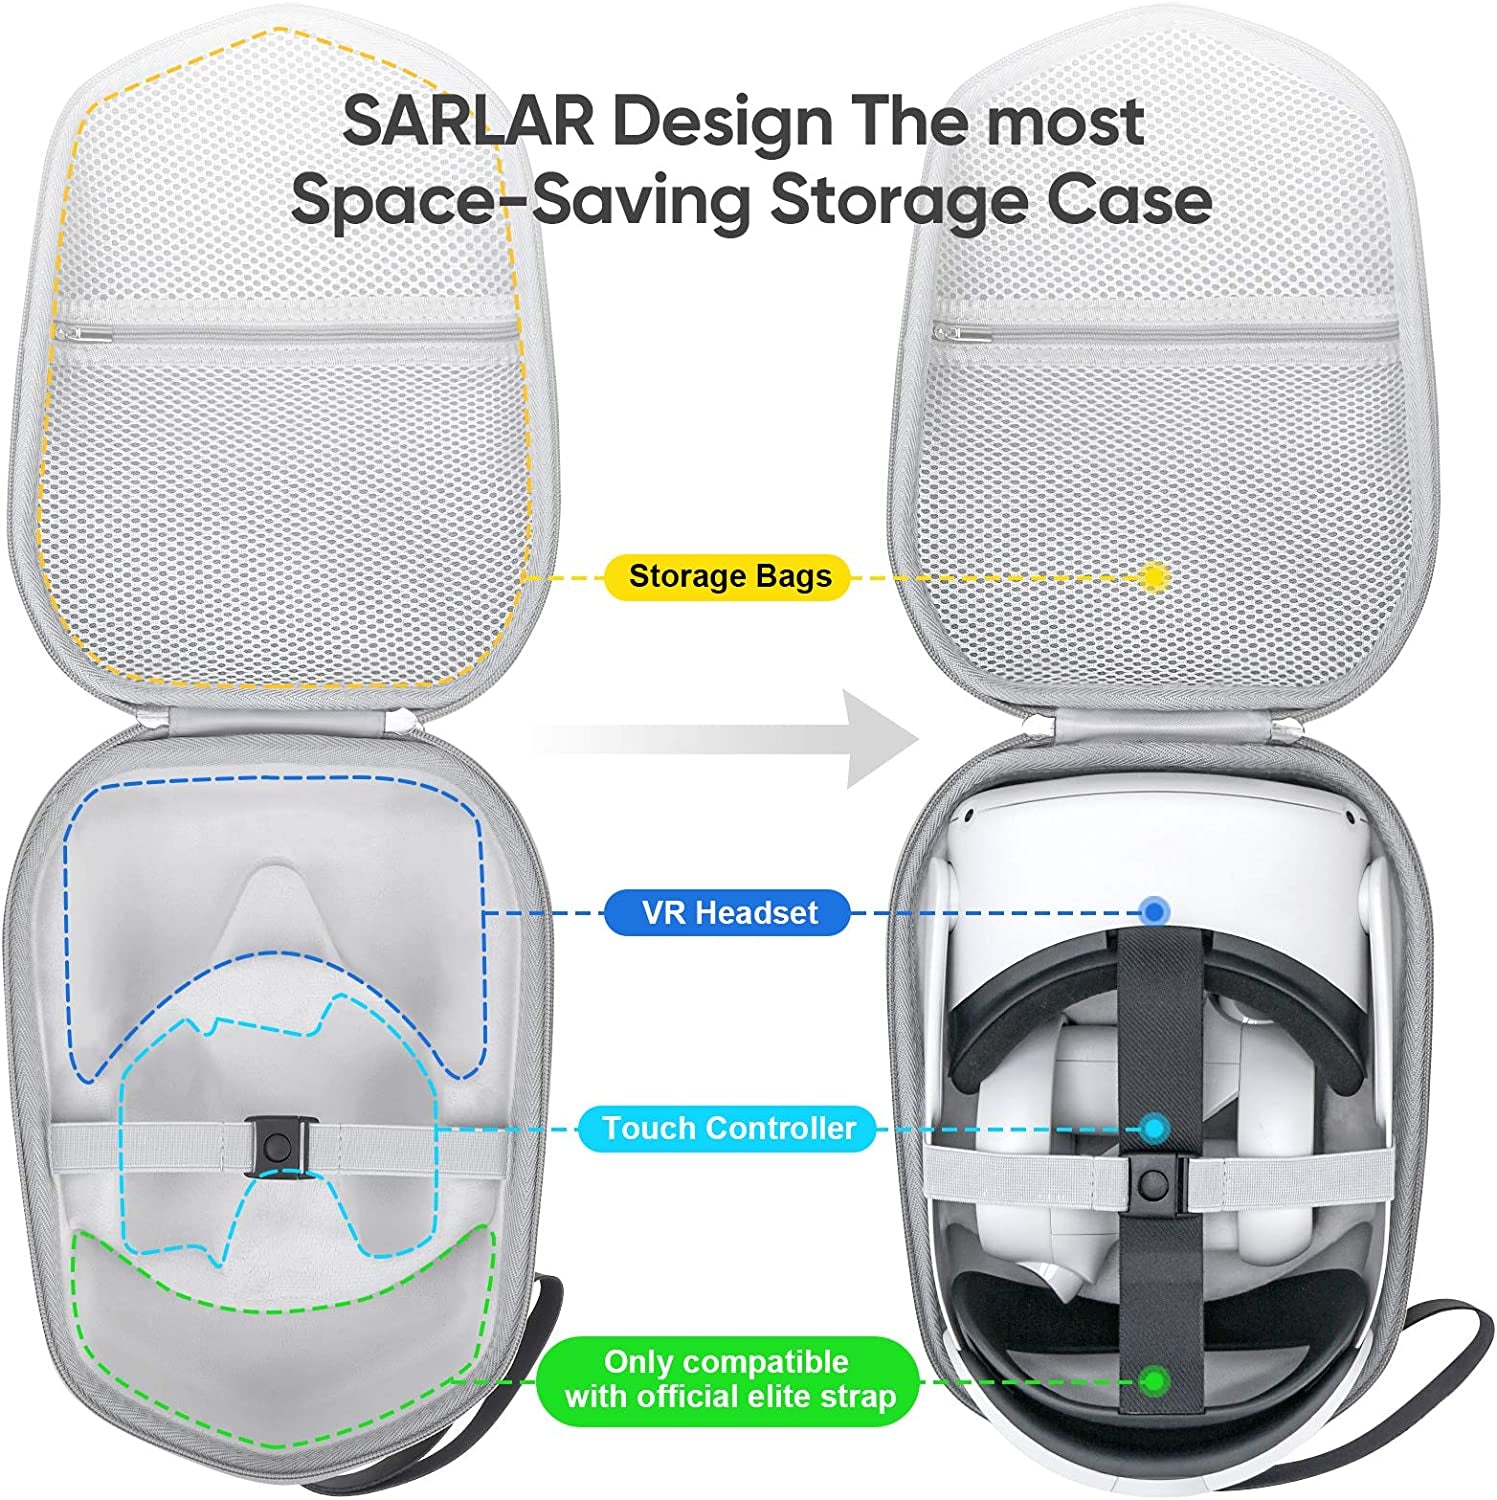 SARLAR Hard Carrying Case Compatible with Meta/Oculus Quest 2 Basic/Elite Version VR Gaming Headset and Touch Controllers Accessories, Suitable for Travel and Home Storage